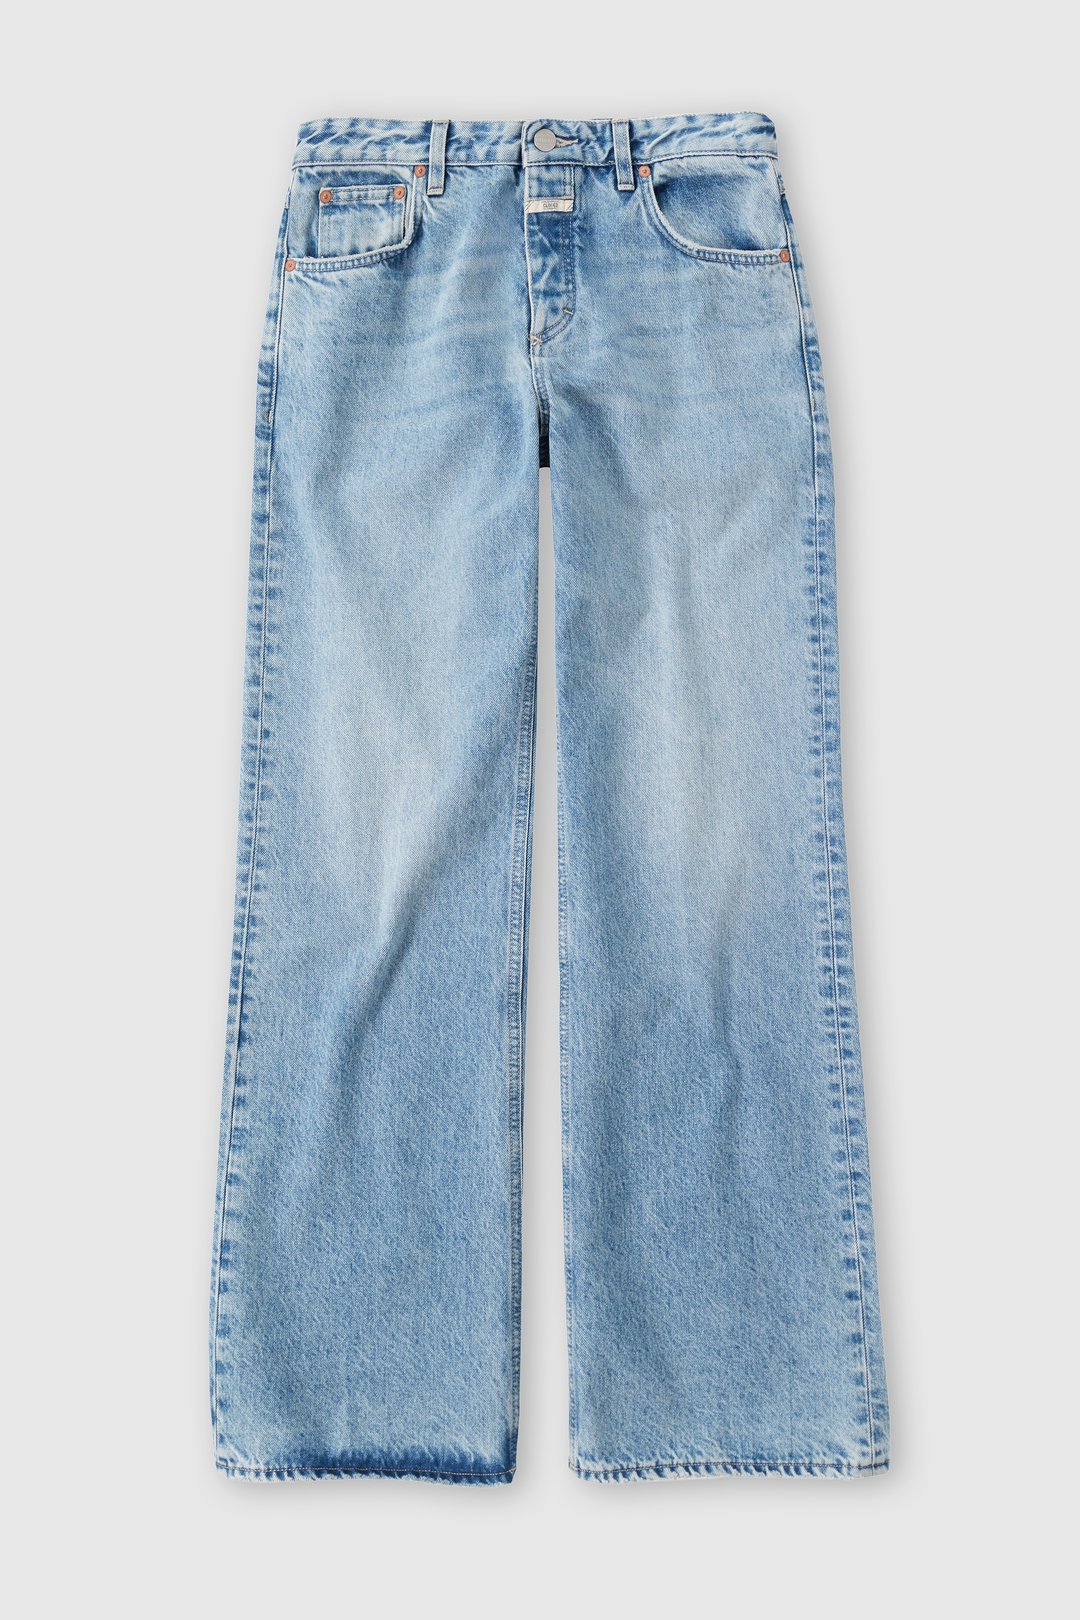 STYLE | NAME GILLAN JEANS - SLIM CLOSED